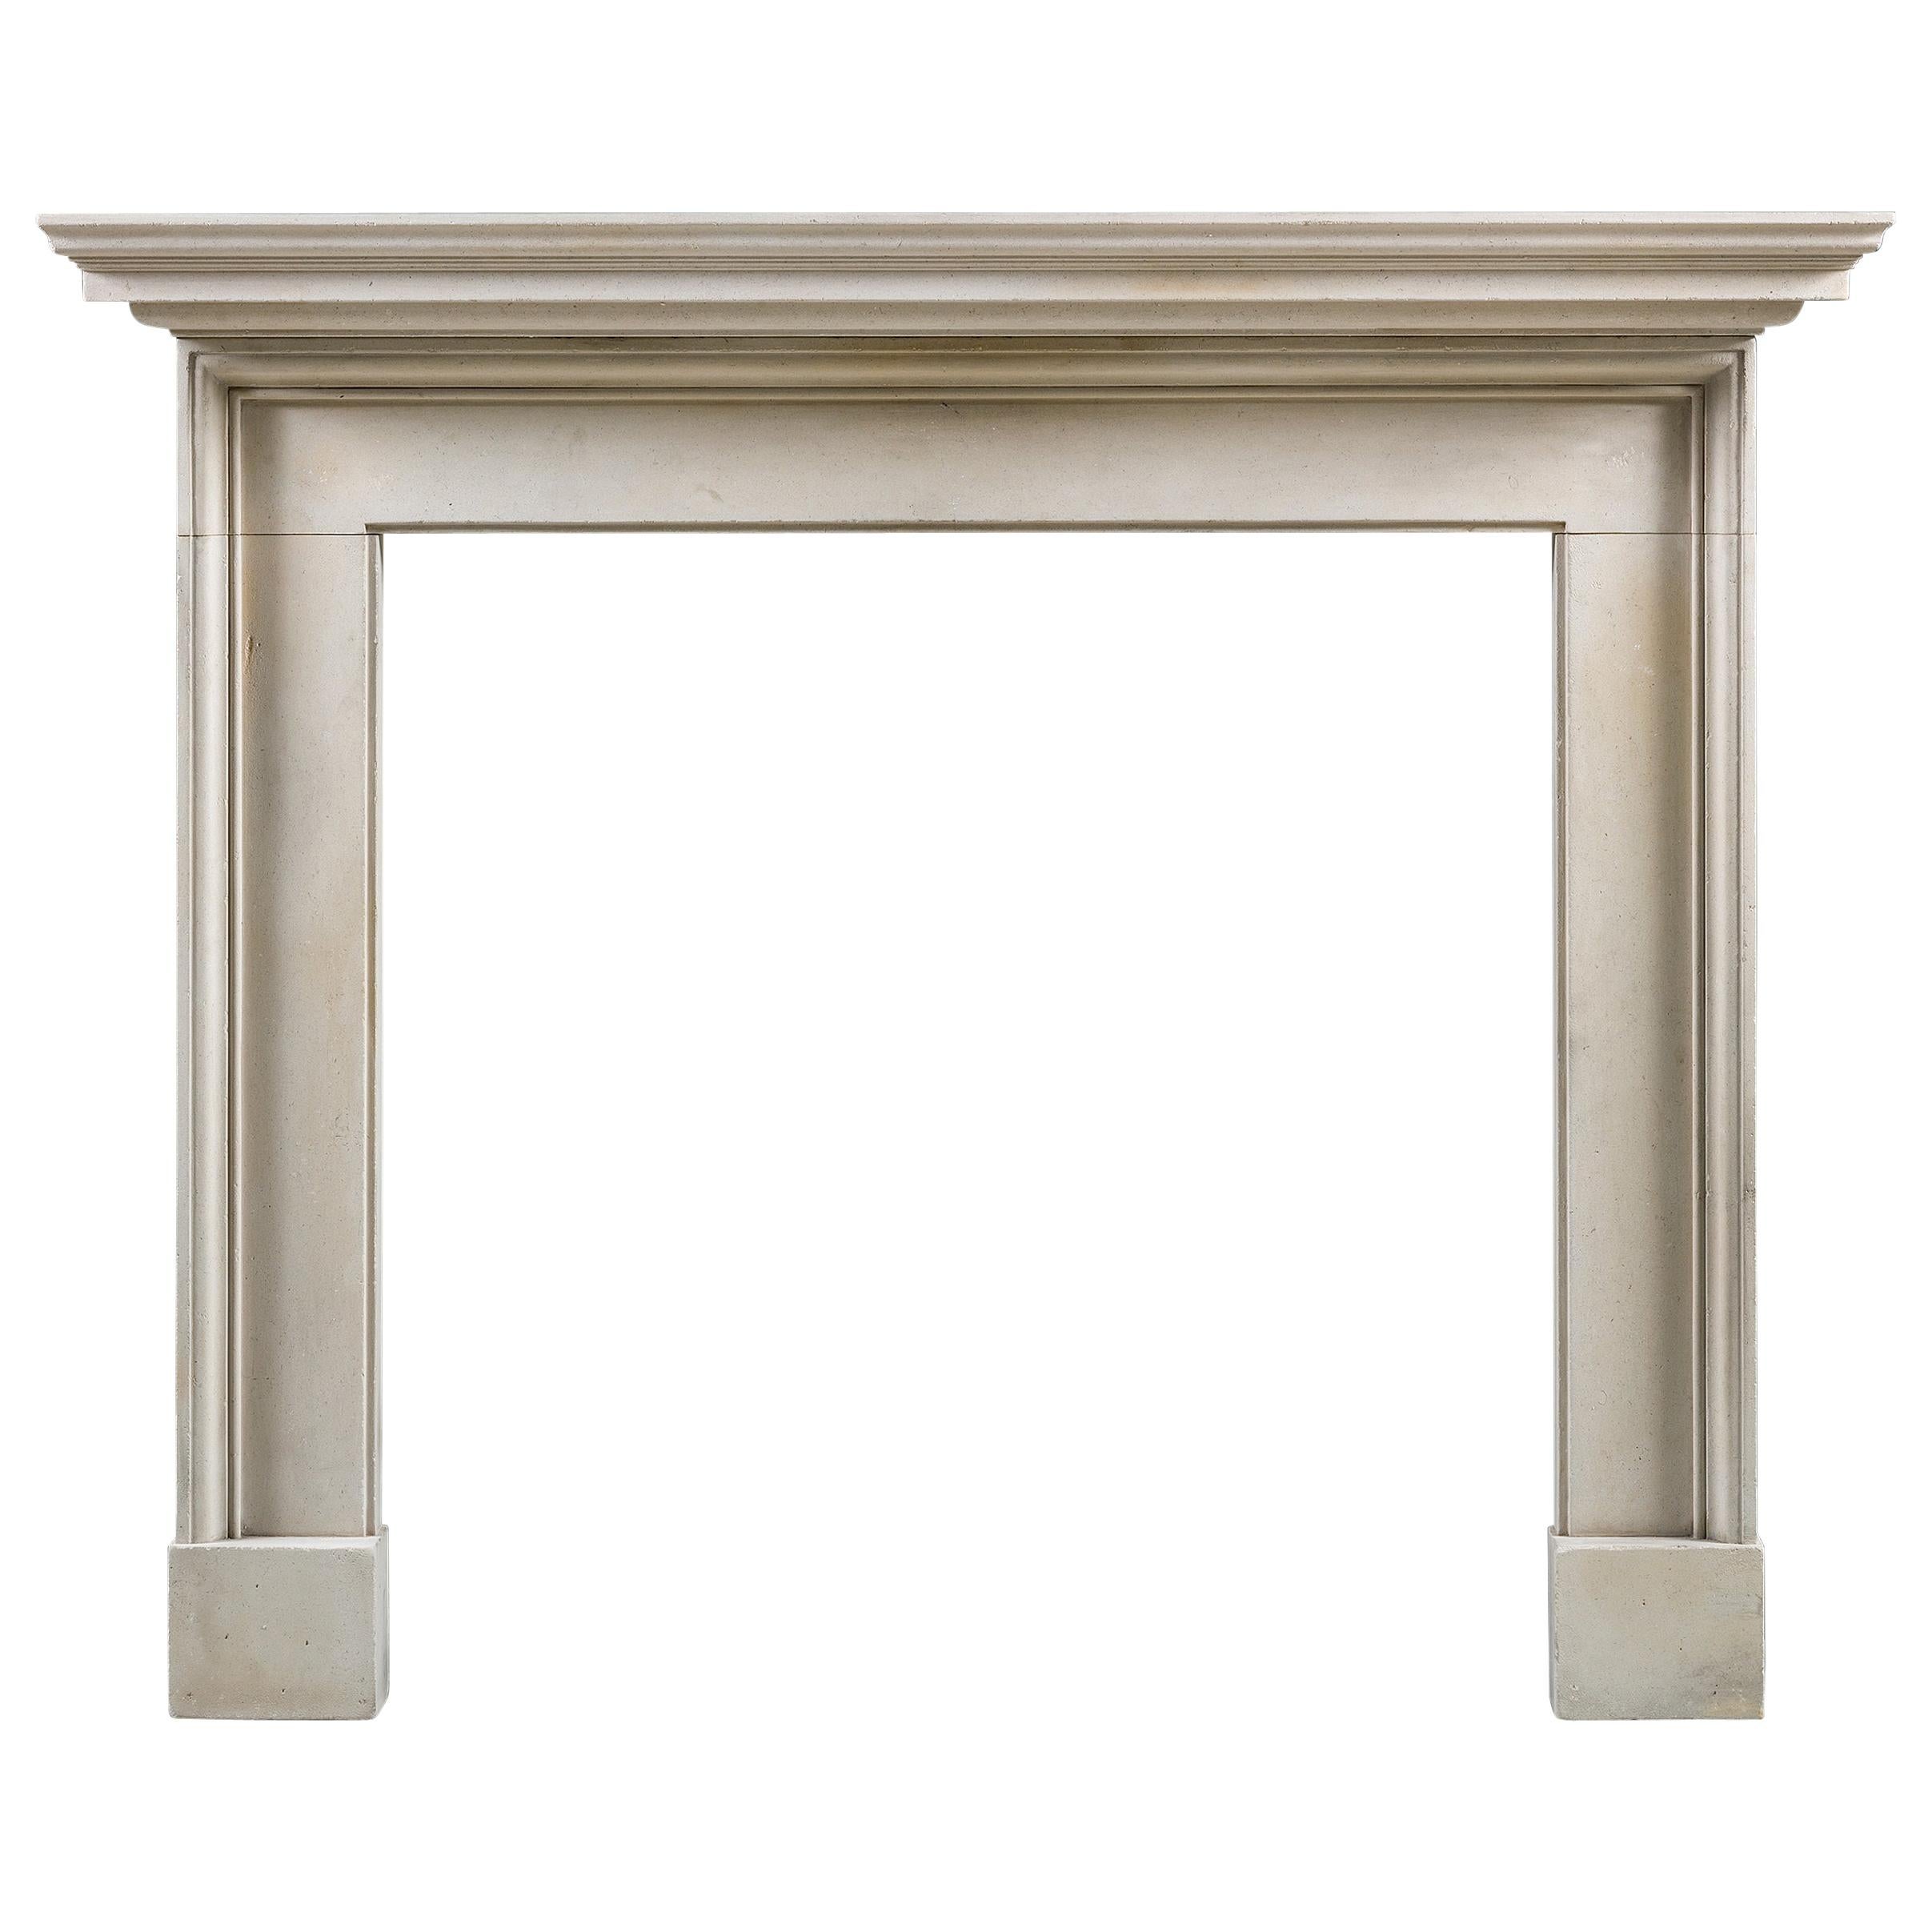 Jamb Dunshay Georgian Reproduction Chimneypiece in Portland Stone For Sale